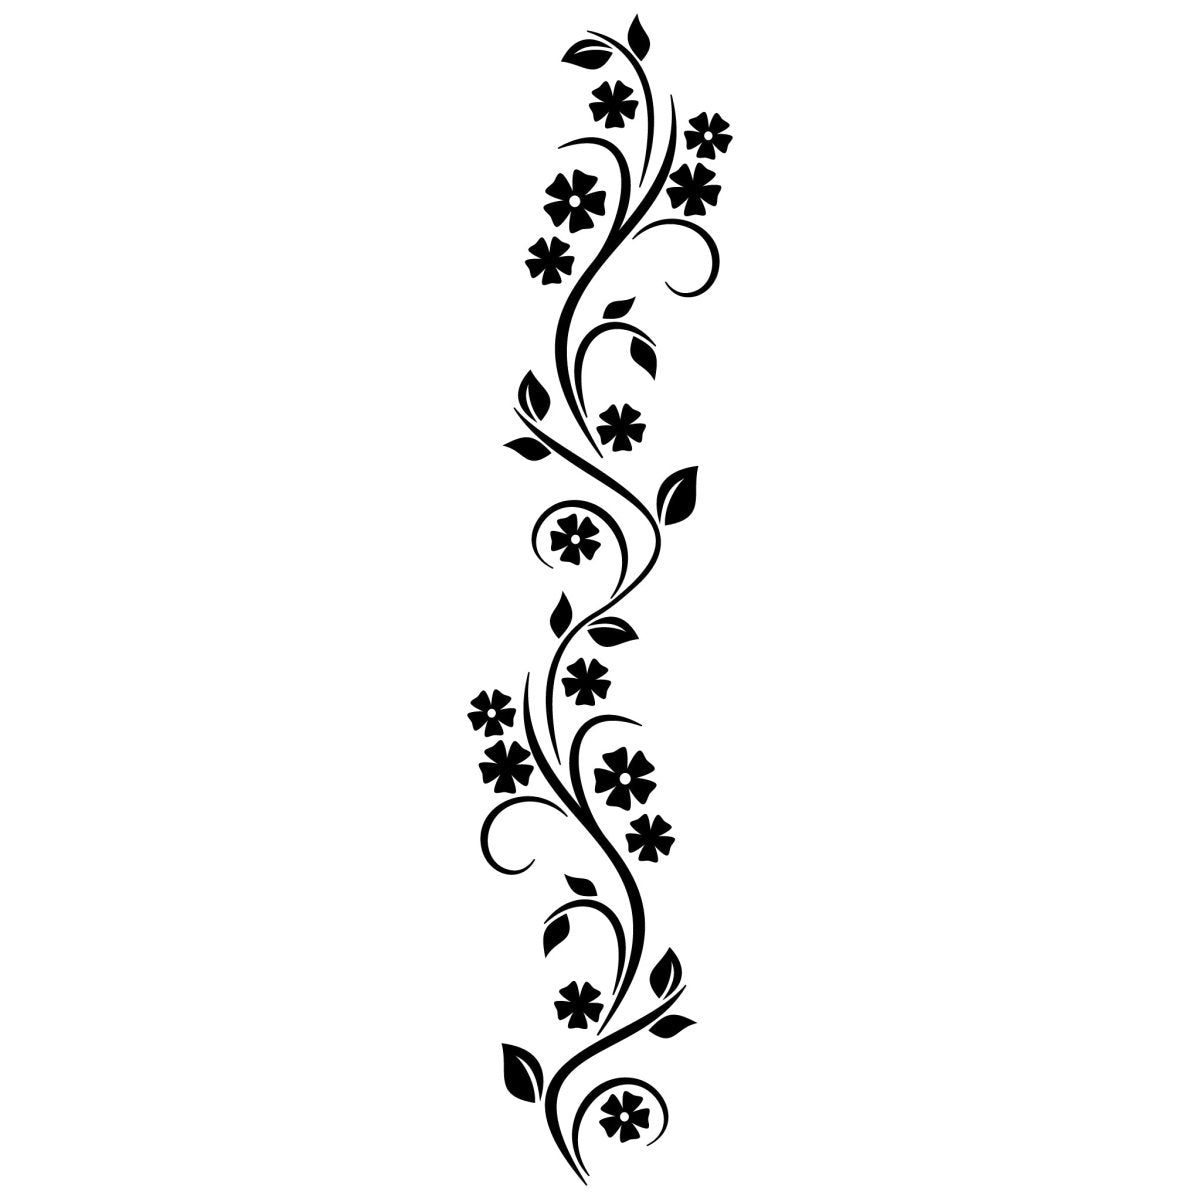 Wall decal ornament tendril WT00000007